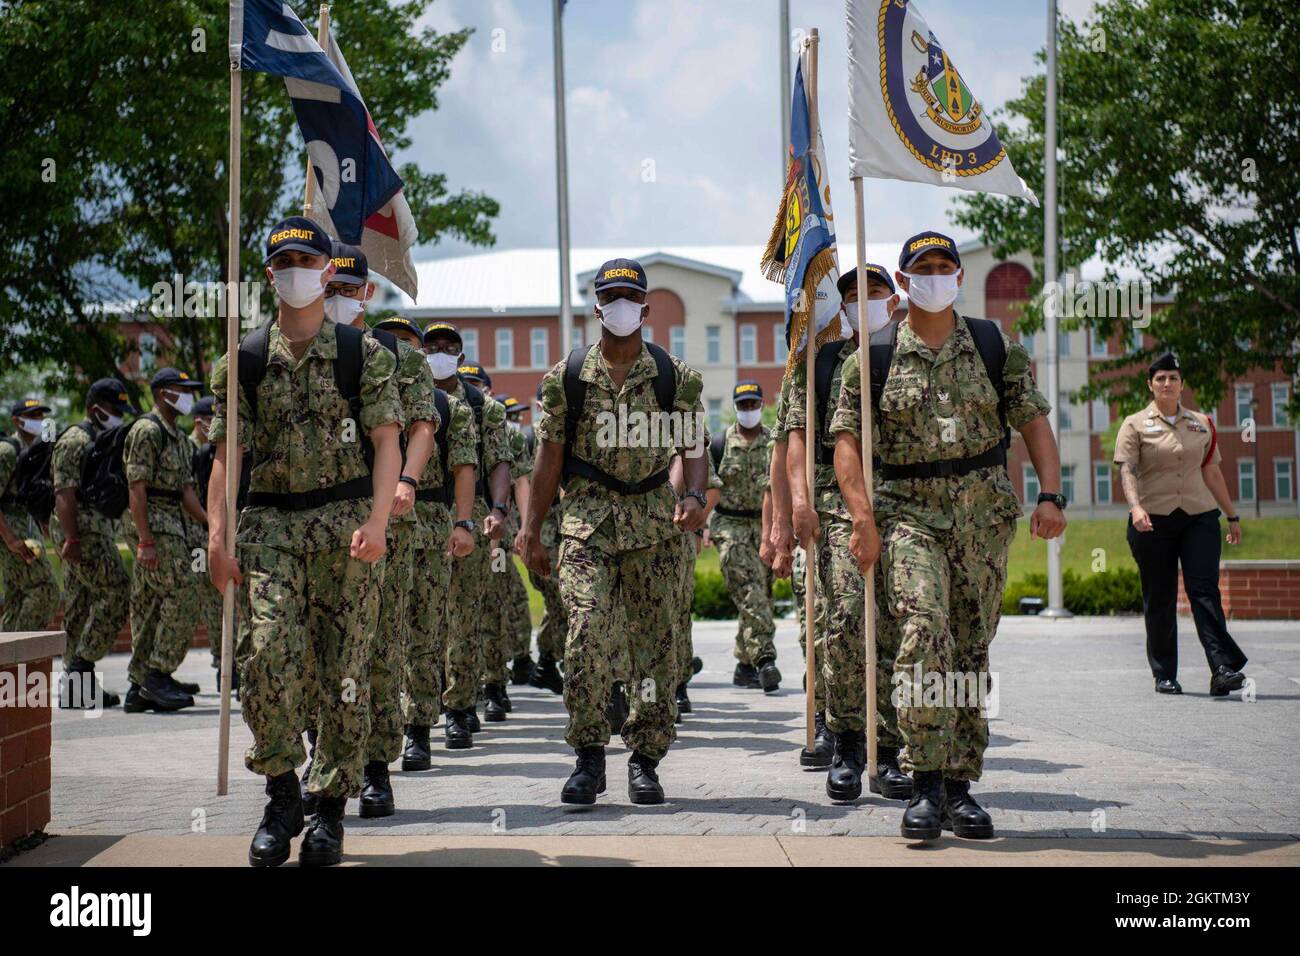 A recruit division marches in formation at Recruit Training Command. More than 40,000 recruits train annually at the Navy’s only boot camp. Stock Photo